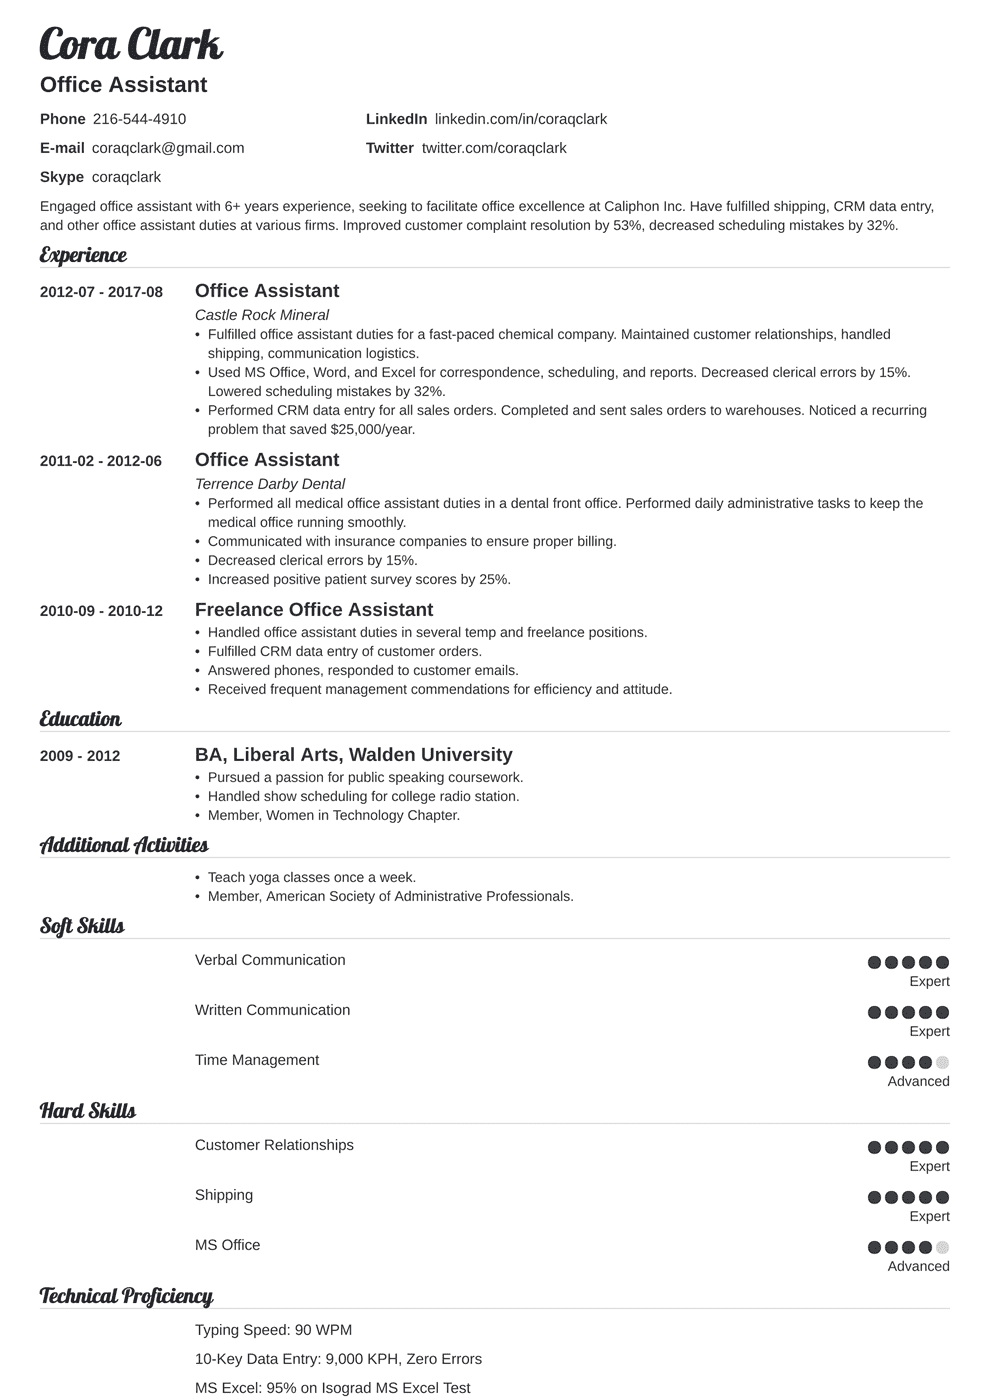 Office Assistant Resume Sample [Skills, Duties & More Tips] Throughout Office Assistant Job Description Template For Office Assistant Job Description Template